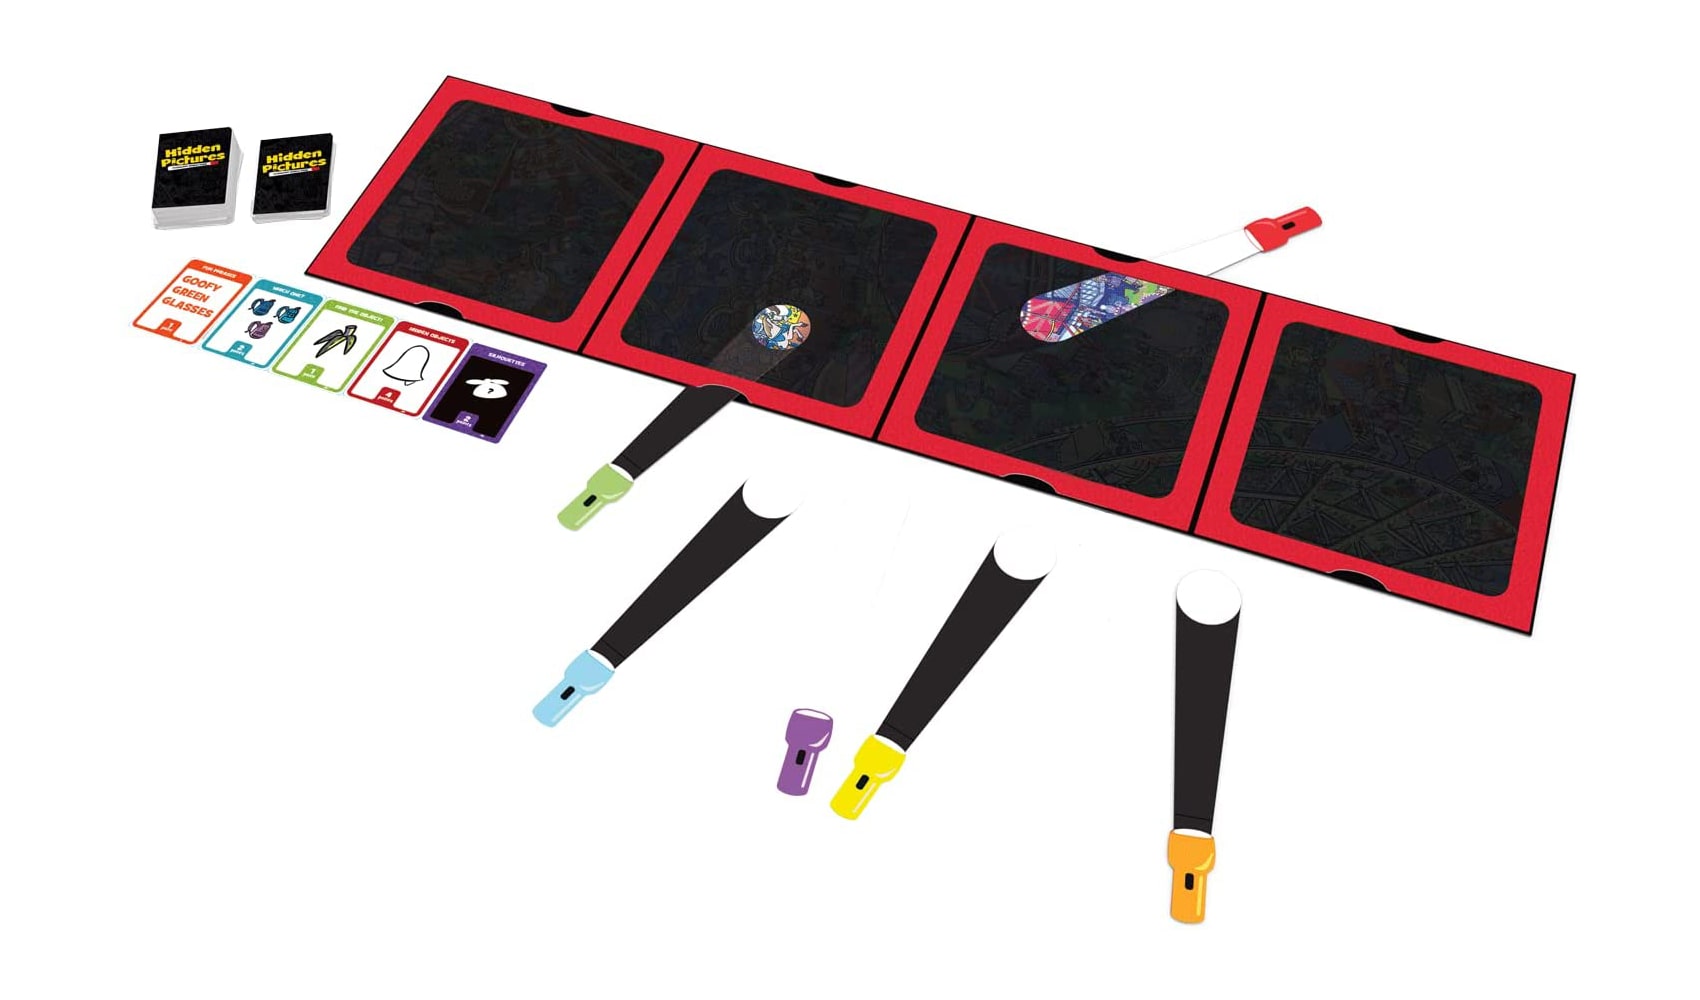 oversized board with 4 panels, multiple flashlights with two inserted into the board, multiple types of cards